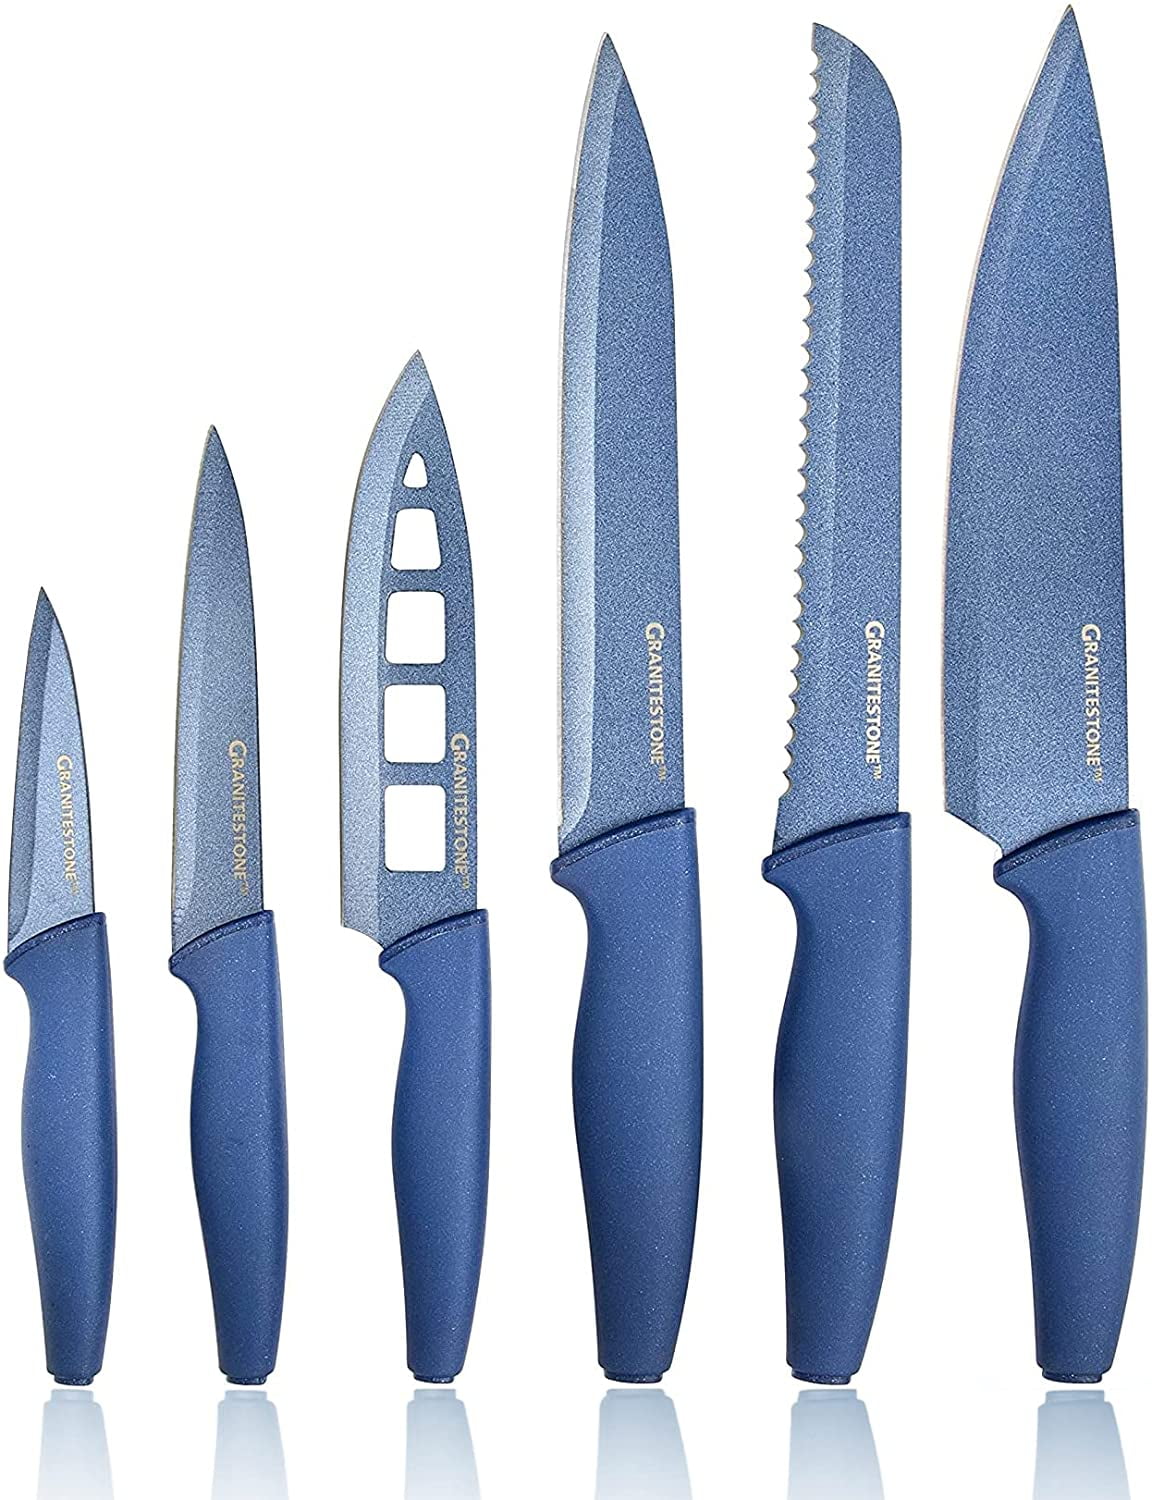 Nutriblade Knife Set by Granitestone, High Grade Professional Chef Kitchen Knives  Set, Knife Sets Toughened Stainless Steel w Nonstick Mineral Coating, Blue,  6 Piece 